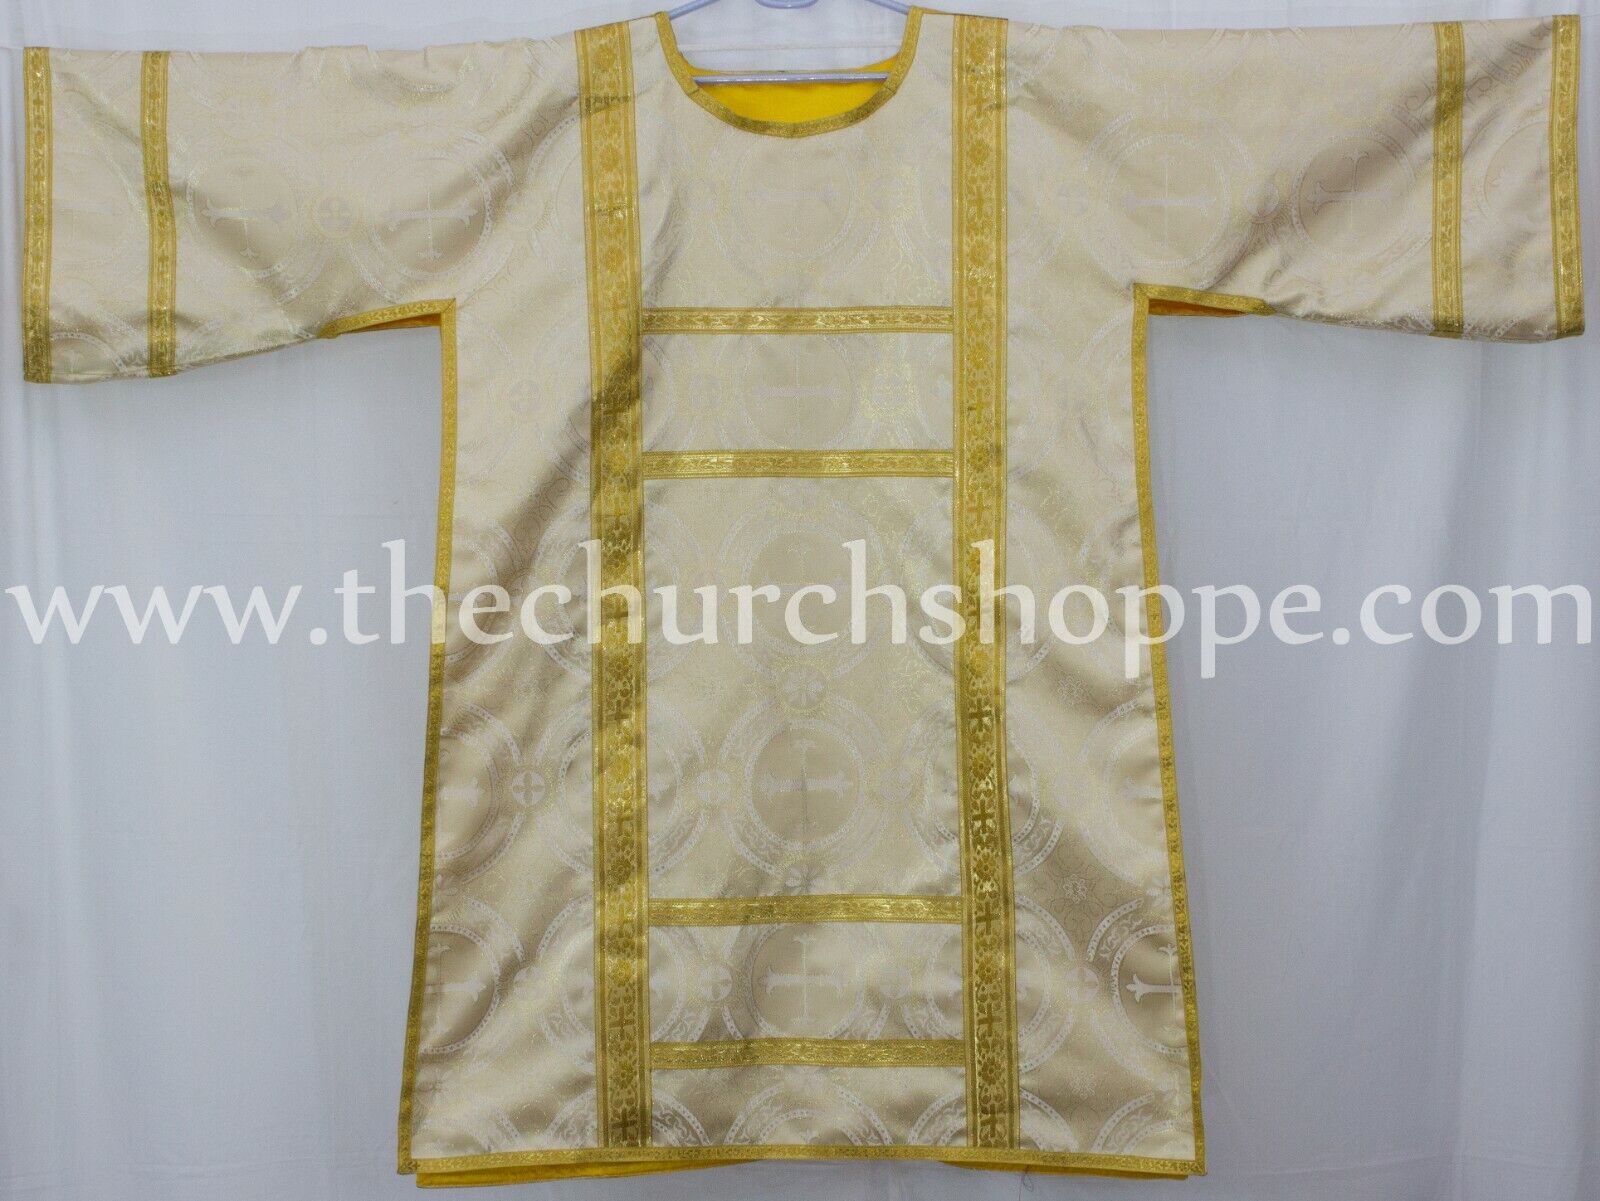 Spanish Dalmatic Metallic Gold vestment with Deacon's stole & maniple ,chasuble